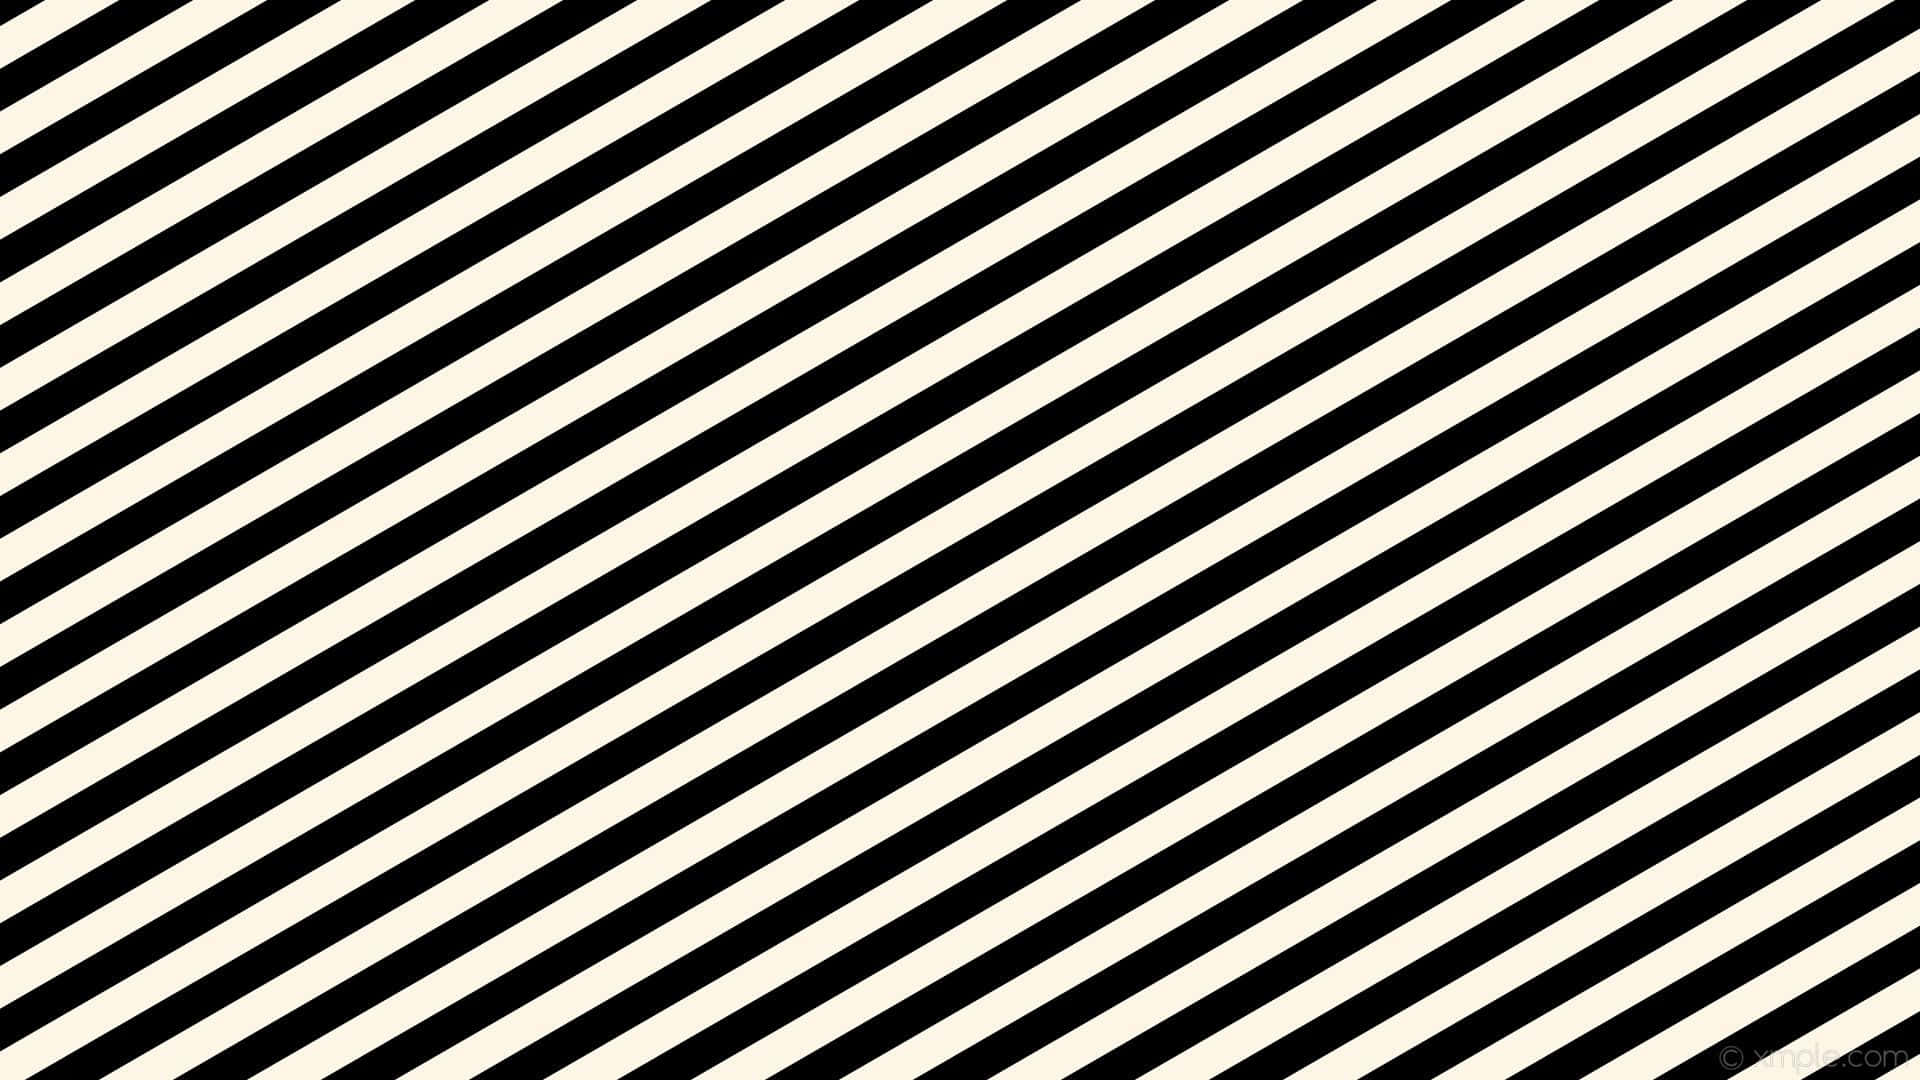 A bold black and white striped design for any modern space